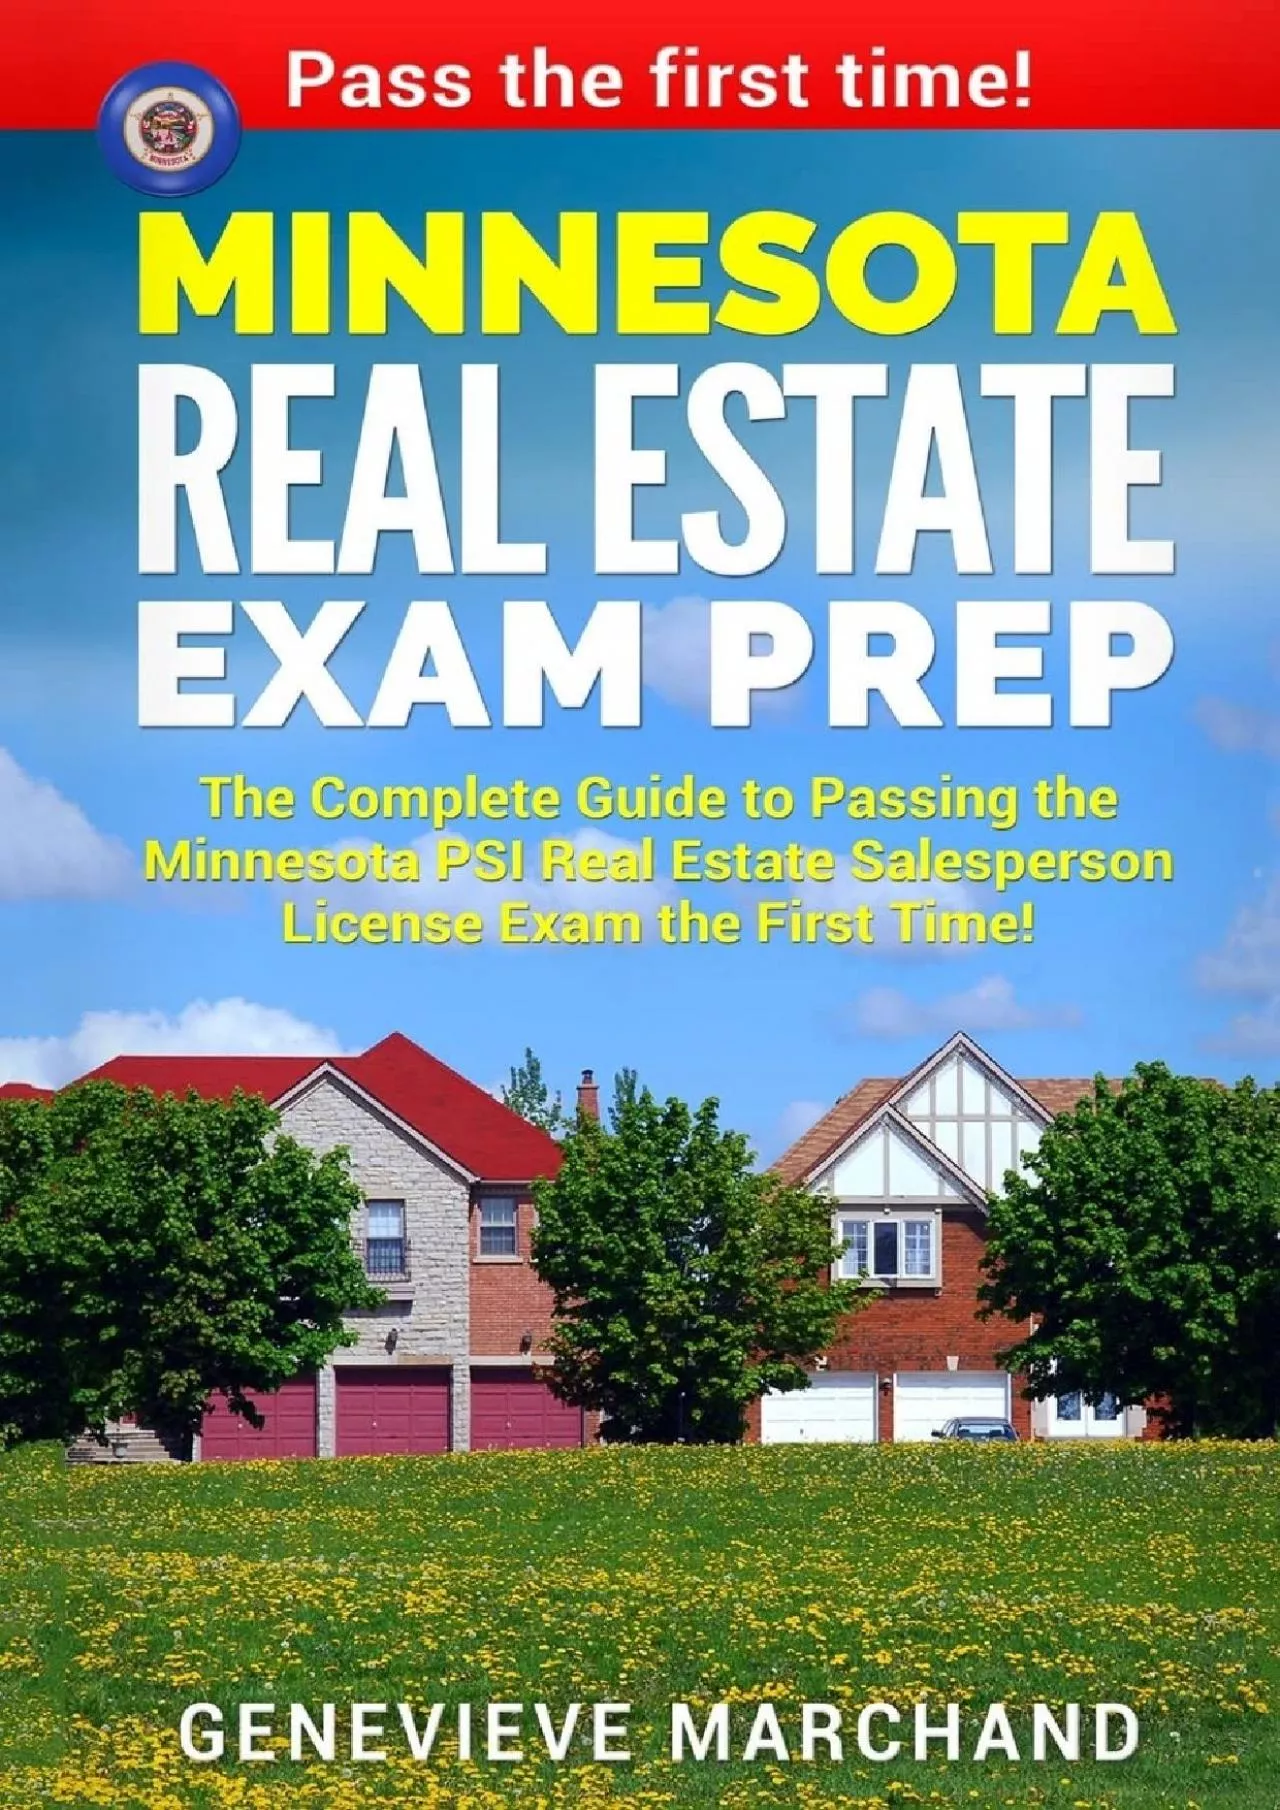 [EBOOK] Minnesota Real Estate Exam Prep: The Complete Guide to Passing the Minnesota PSI